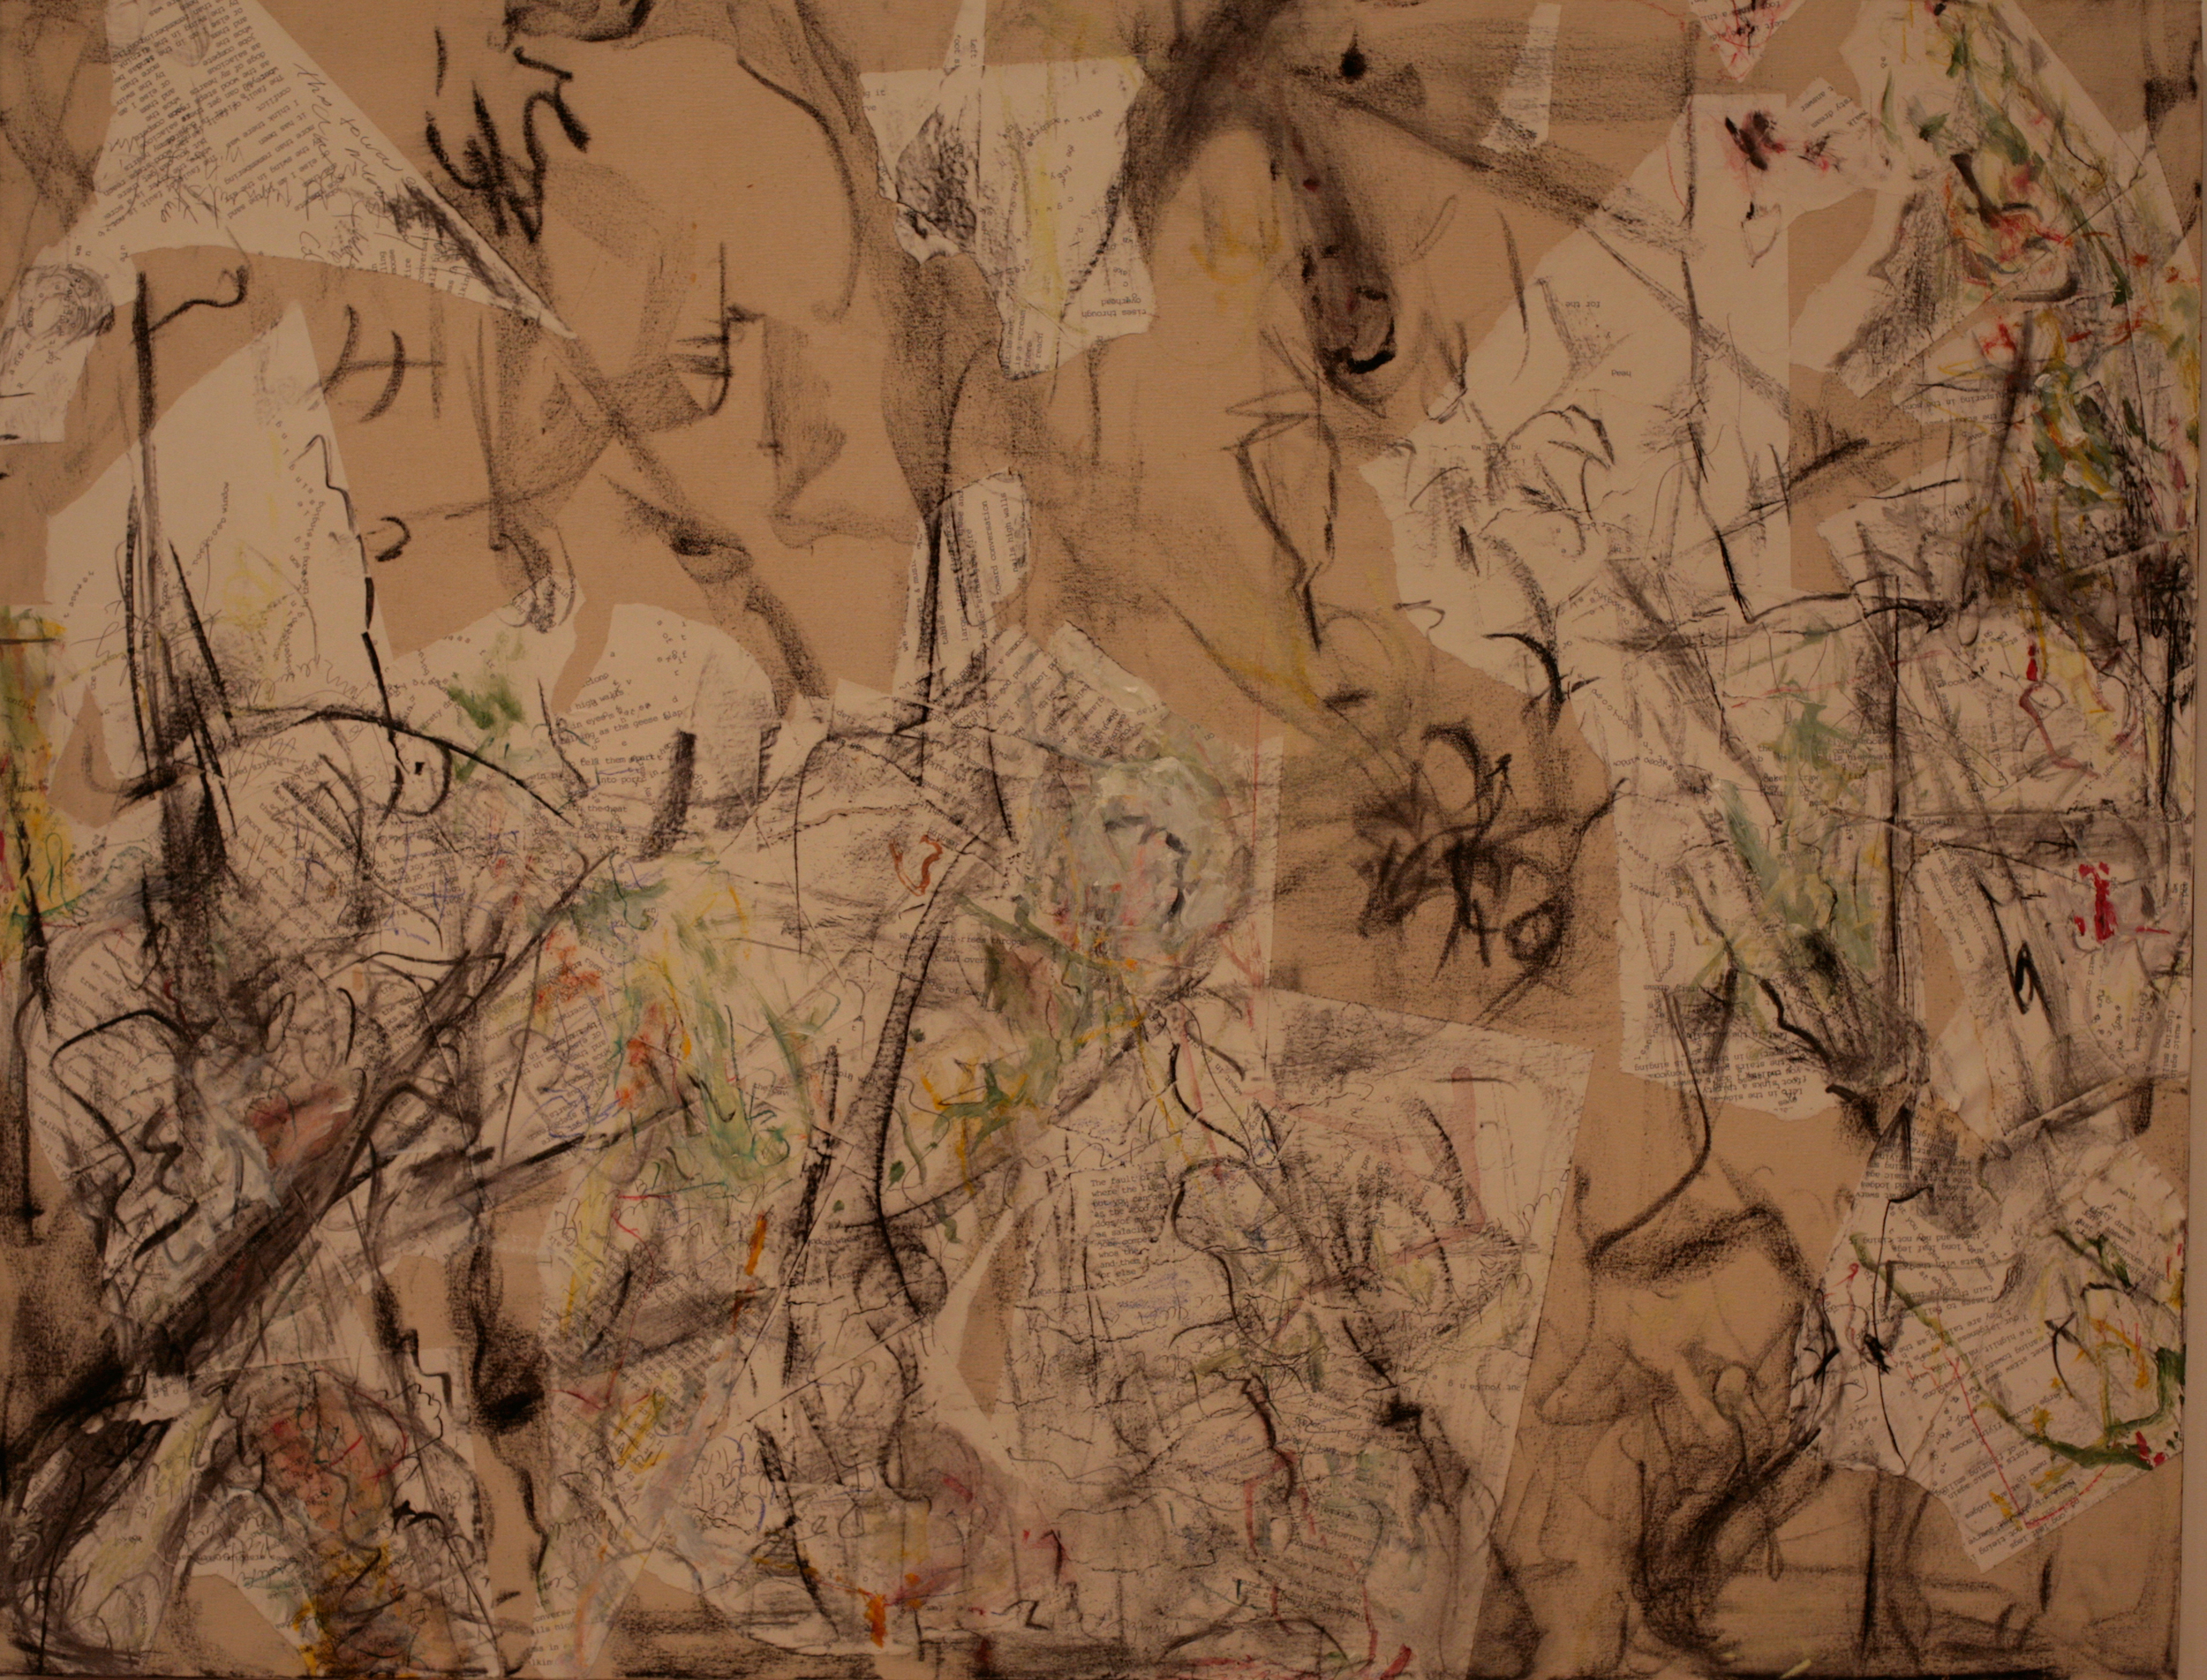 "Wordtree #13", charcoal, type face, poetry collage, acrylic on canvas, 38"x48", 